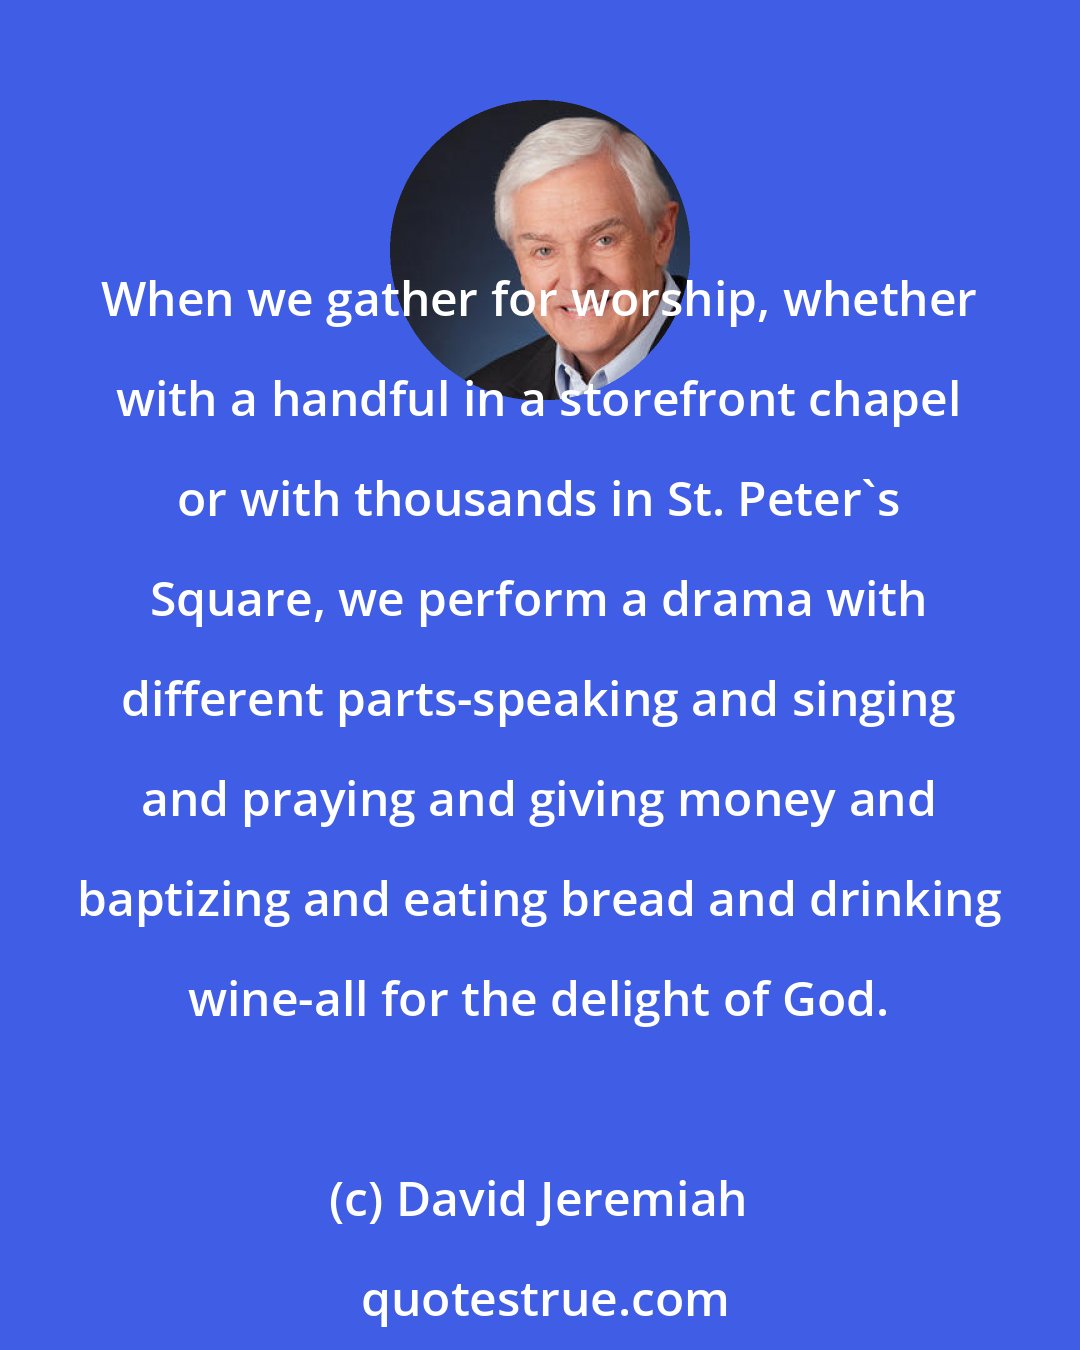 David Jeremiah: When we gather for worship, whether with a handful in a storefront chapel or with thousands in St. Peter's Square, we perform a drama with different parts-speaking and singing and praying and giving money and baptizing and eating bread and drinking wine-all for the delight of God.